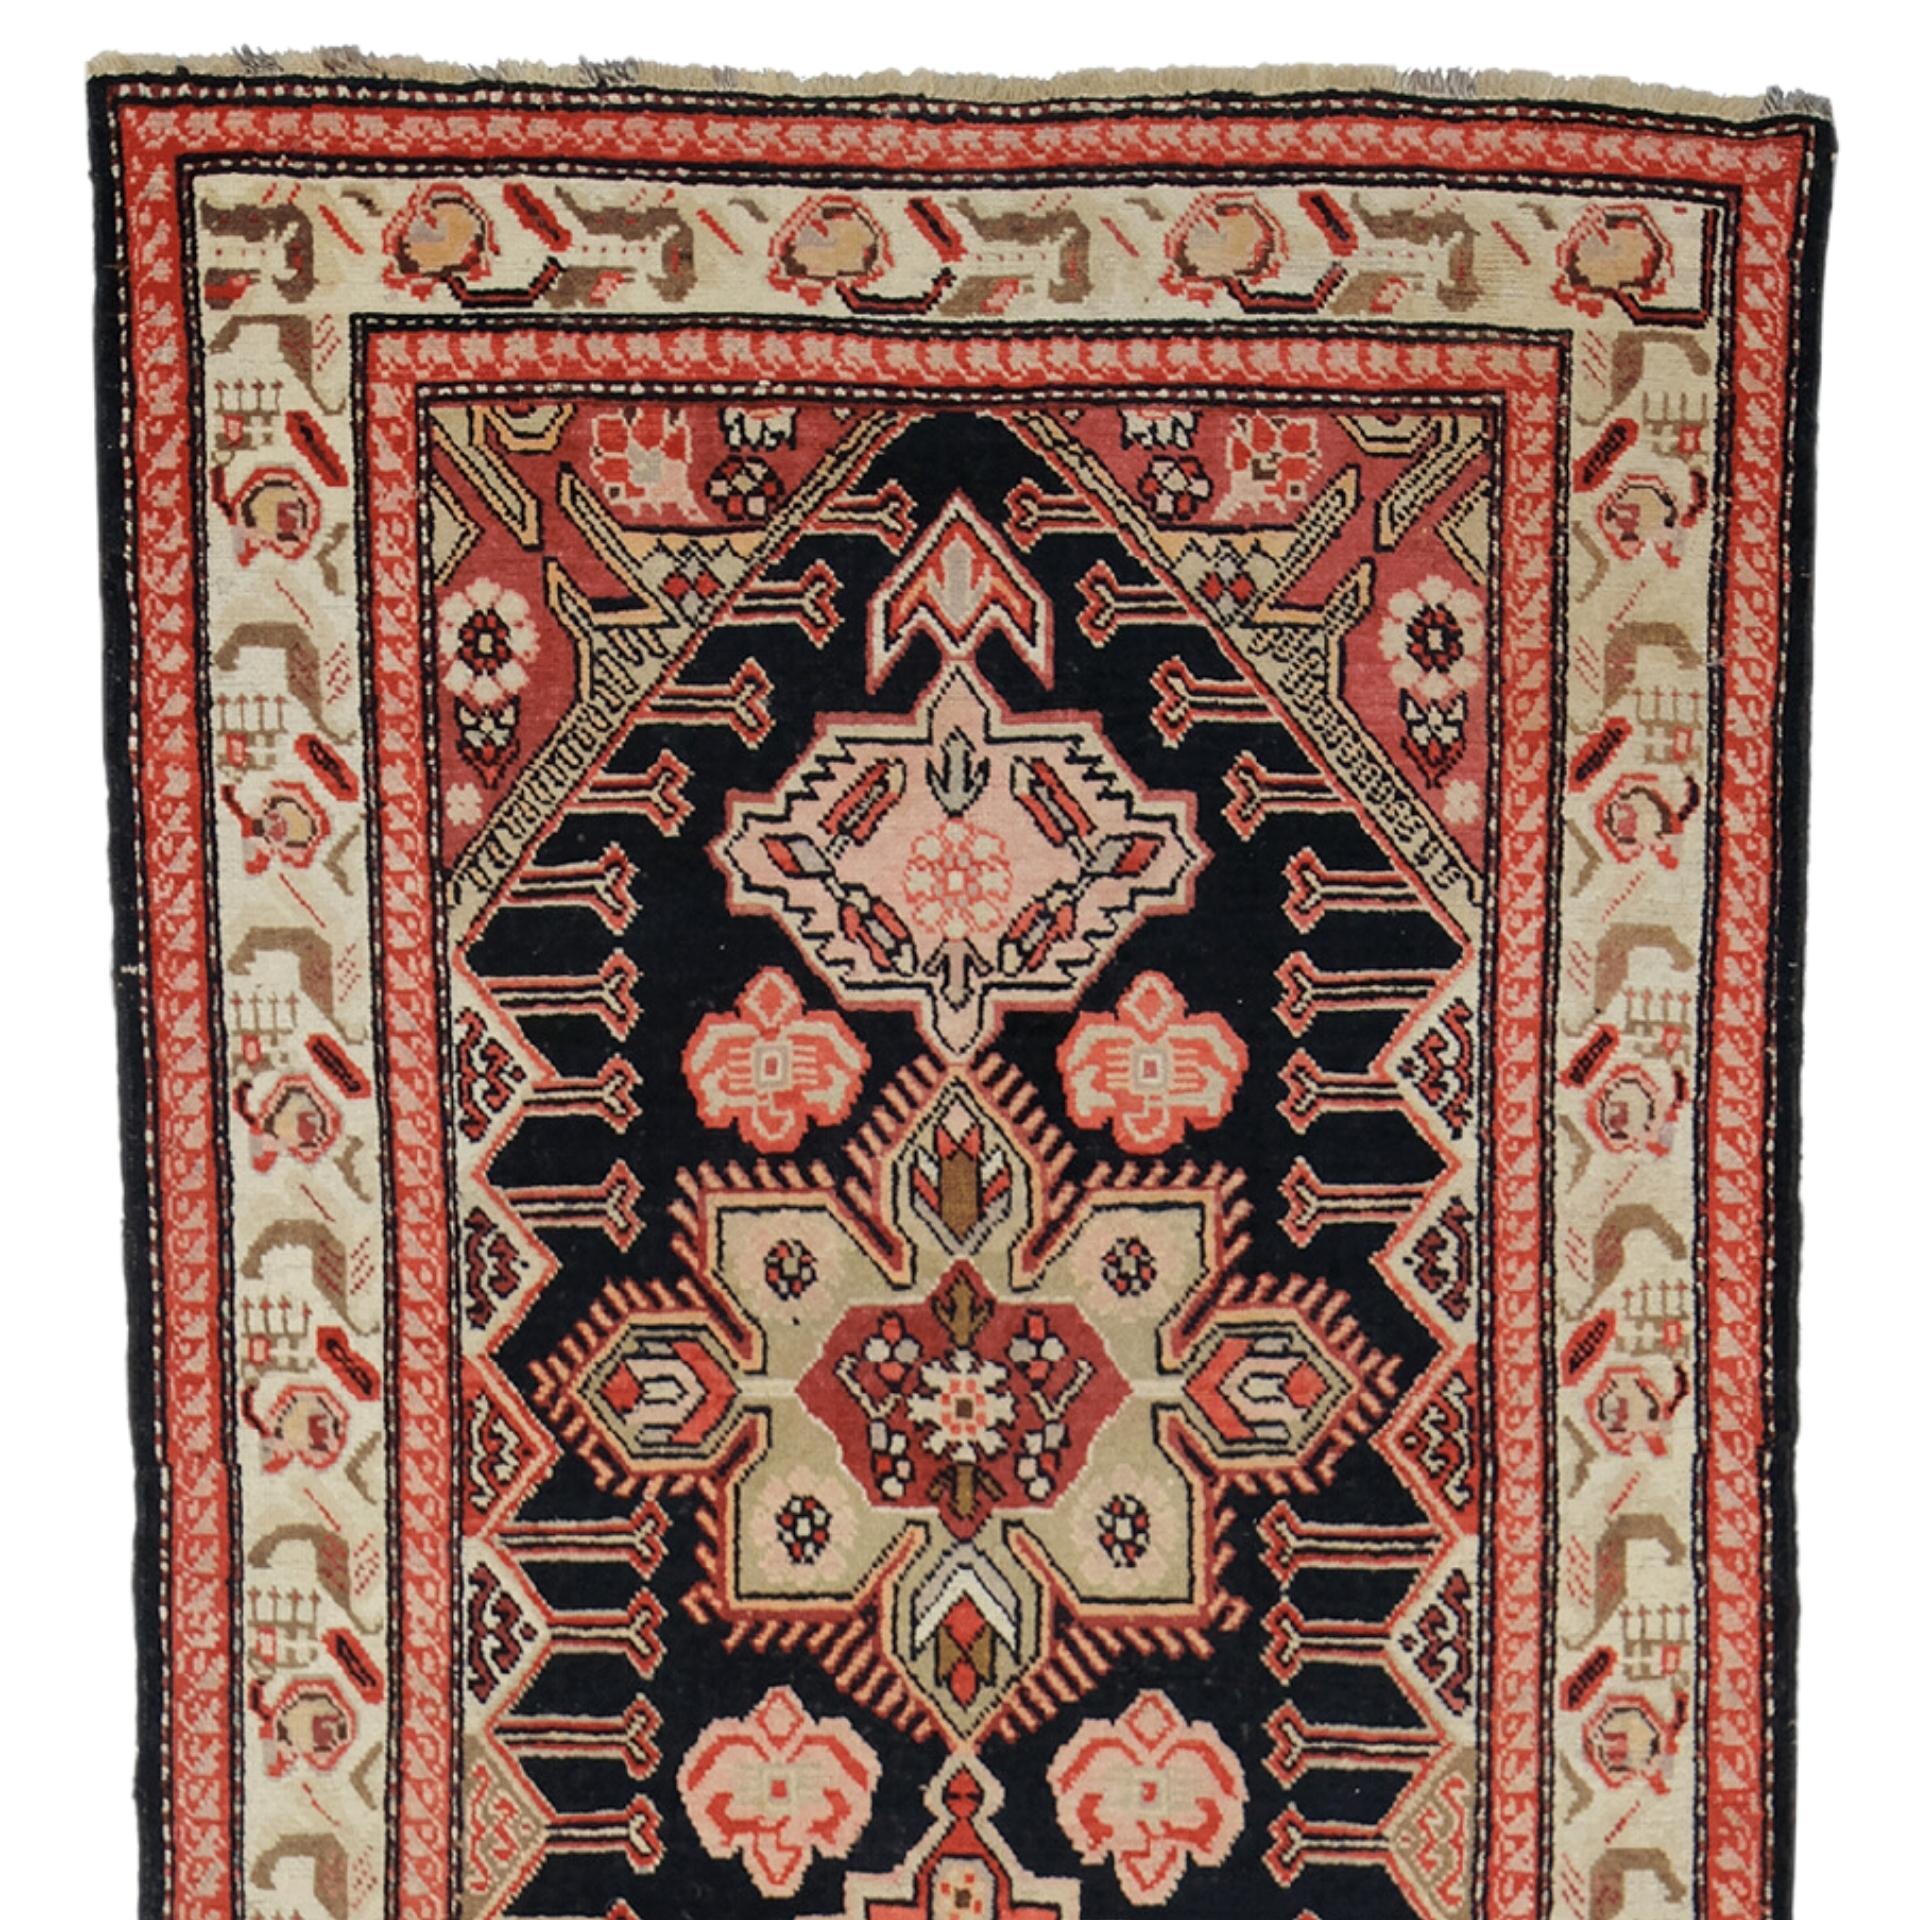 This antique Karabakh runner is a magnificent artifact that will allow you to establish a connection between art and history. This 19th-century rug is hand-woven with precision and care, with each thread telling the story of an era. With its rich